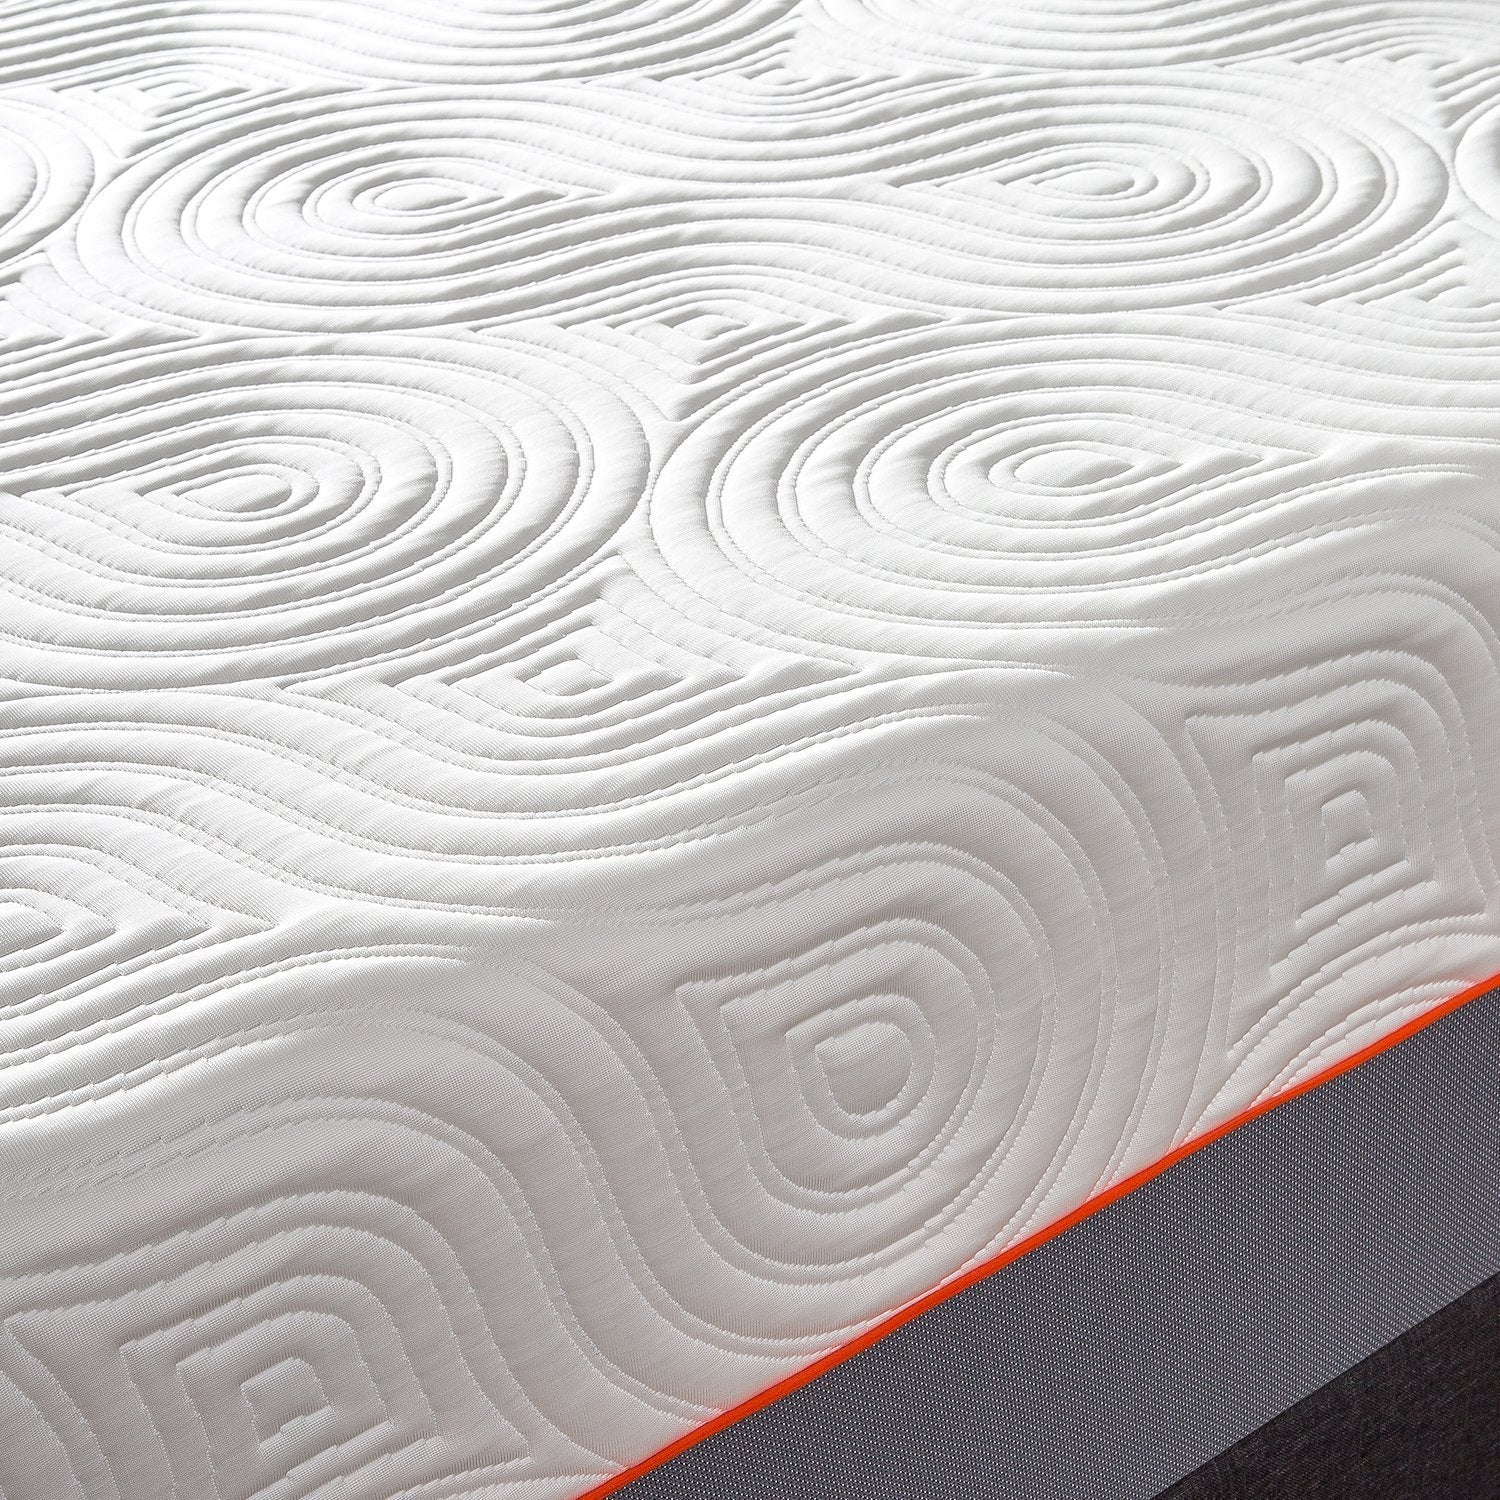 Cooling Memory Foam and iCoil Spring Hybrid Mattress